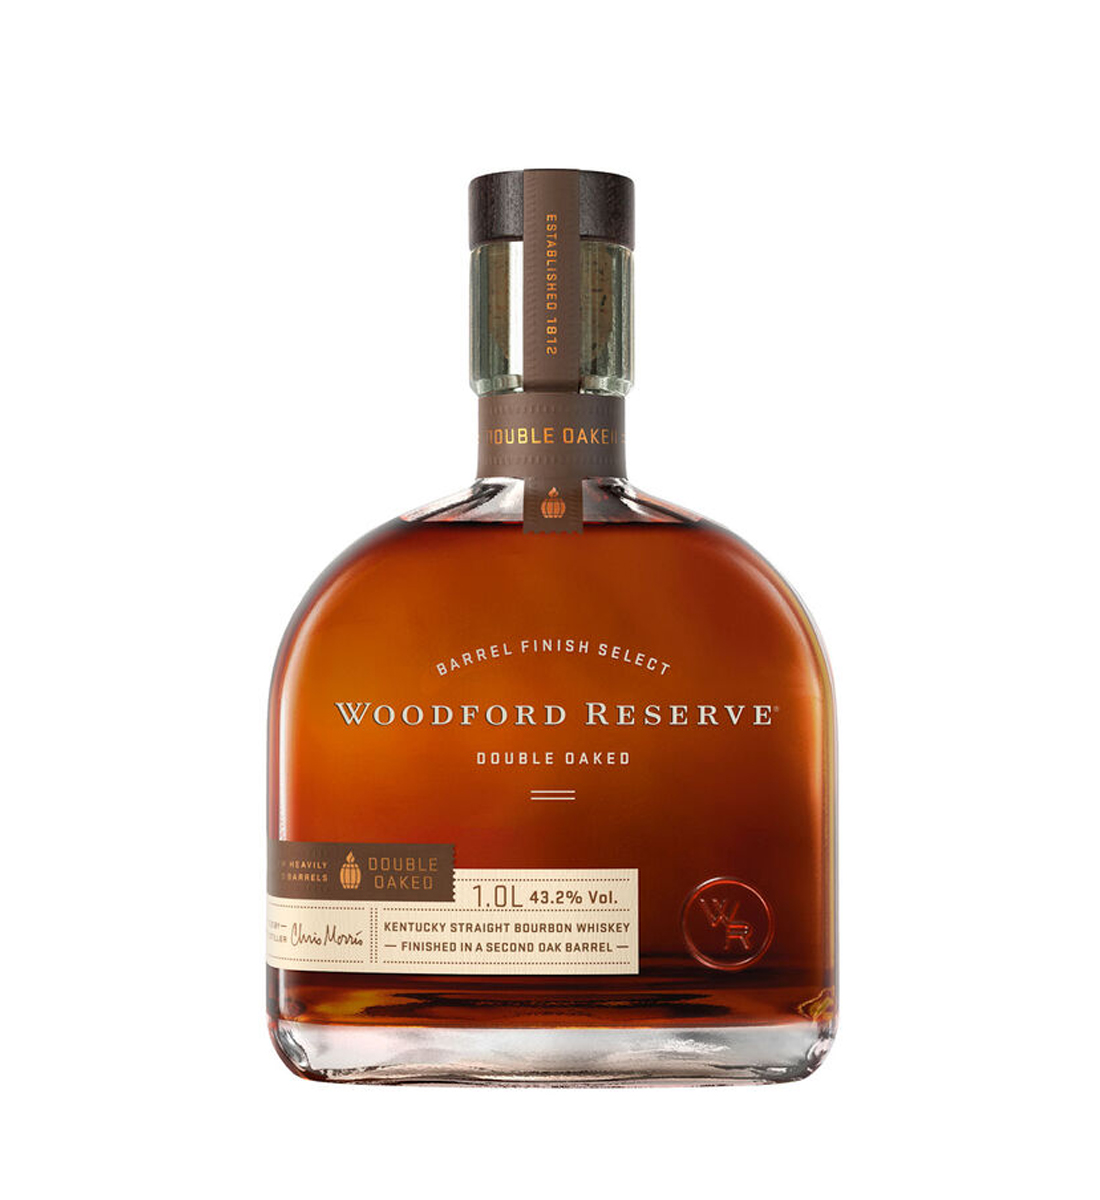 Woodford Reserve Double Oaked 1L Bauturi